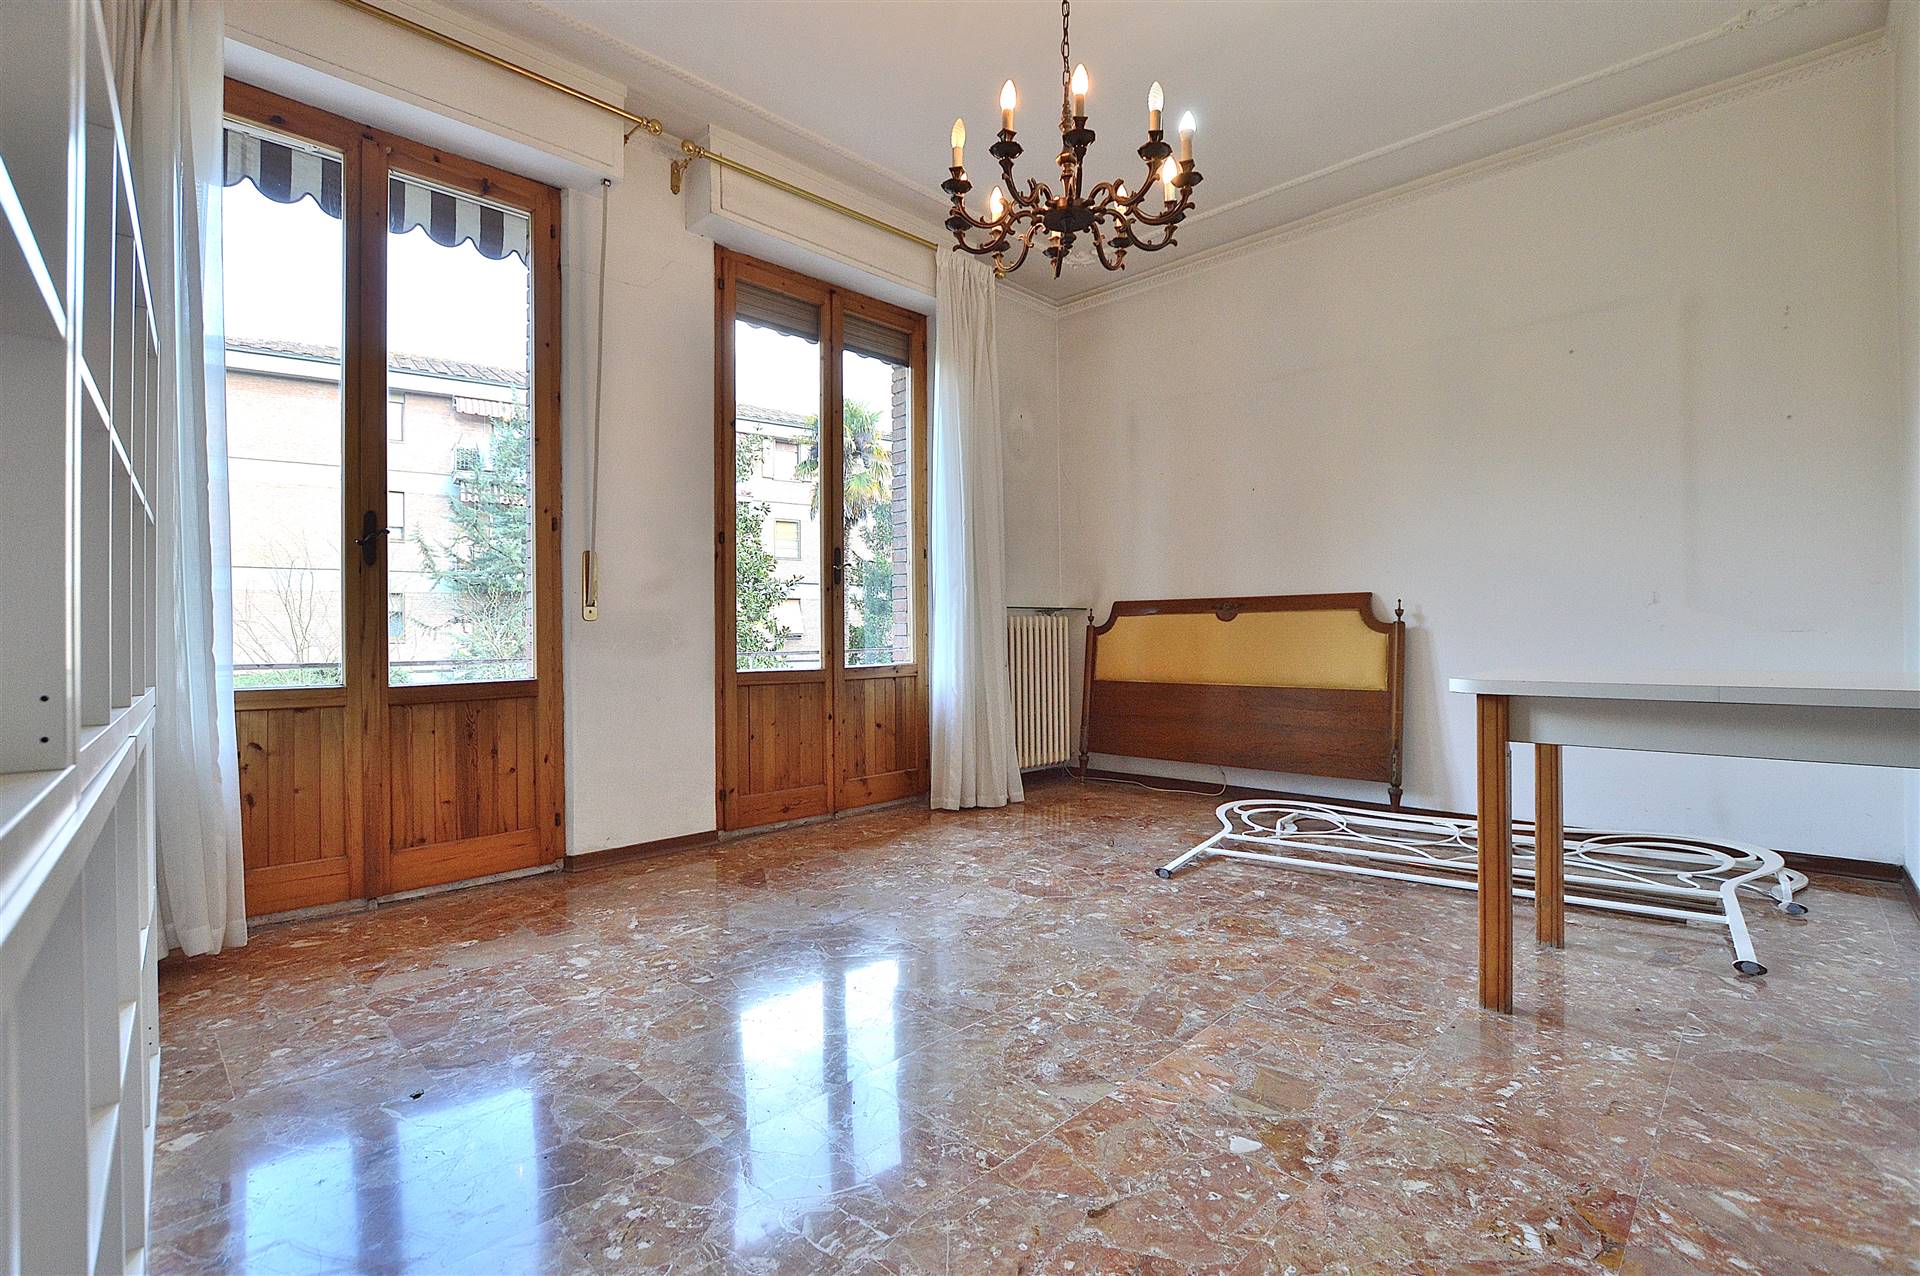 ACQUACALDA, SIENA, Apartment for sale of 108 Sq. mt., Habitable, Heating Individual heating system, Energetic class: G, Epi: 175 kwh/m2 year, placed at 1° on 3, composed by: 5 Rooms, Separate kitchen,